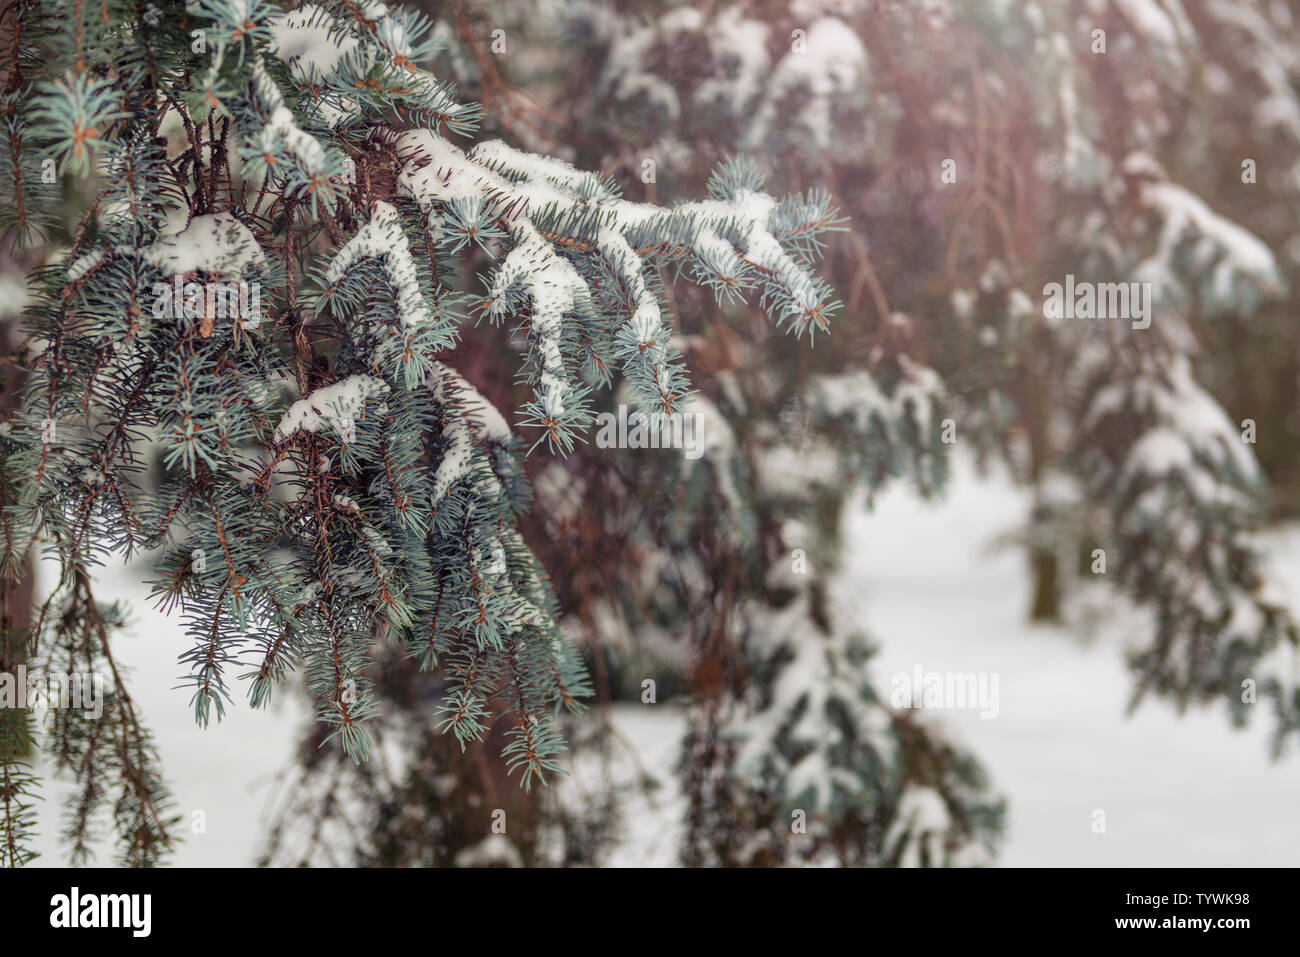 Frozen Christmas tree brances covered by snow. Vintage colored winter scene Stock Photo